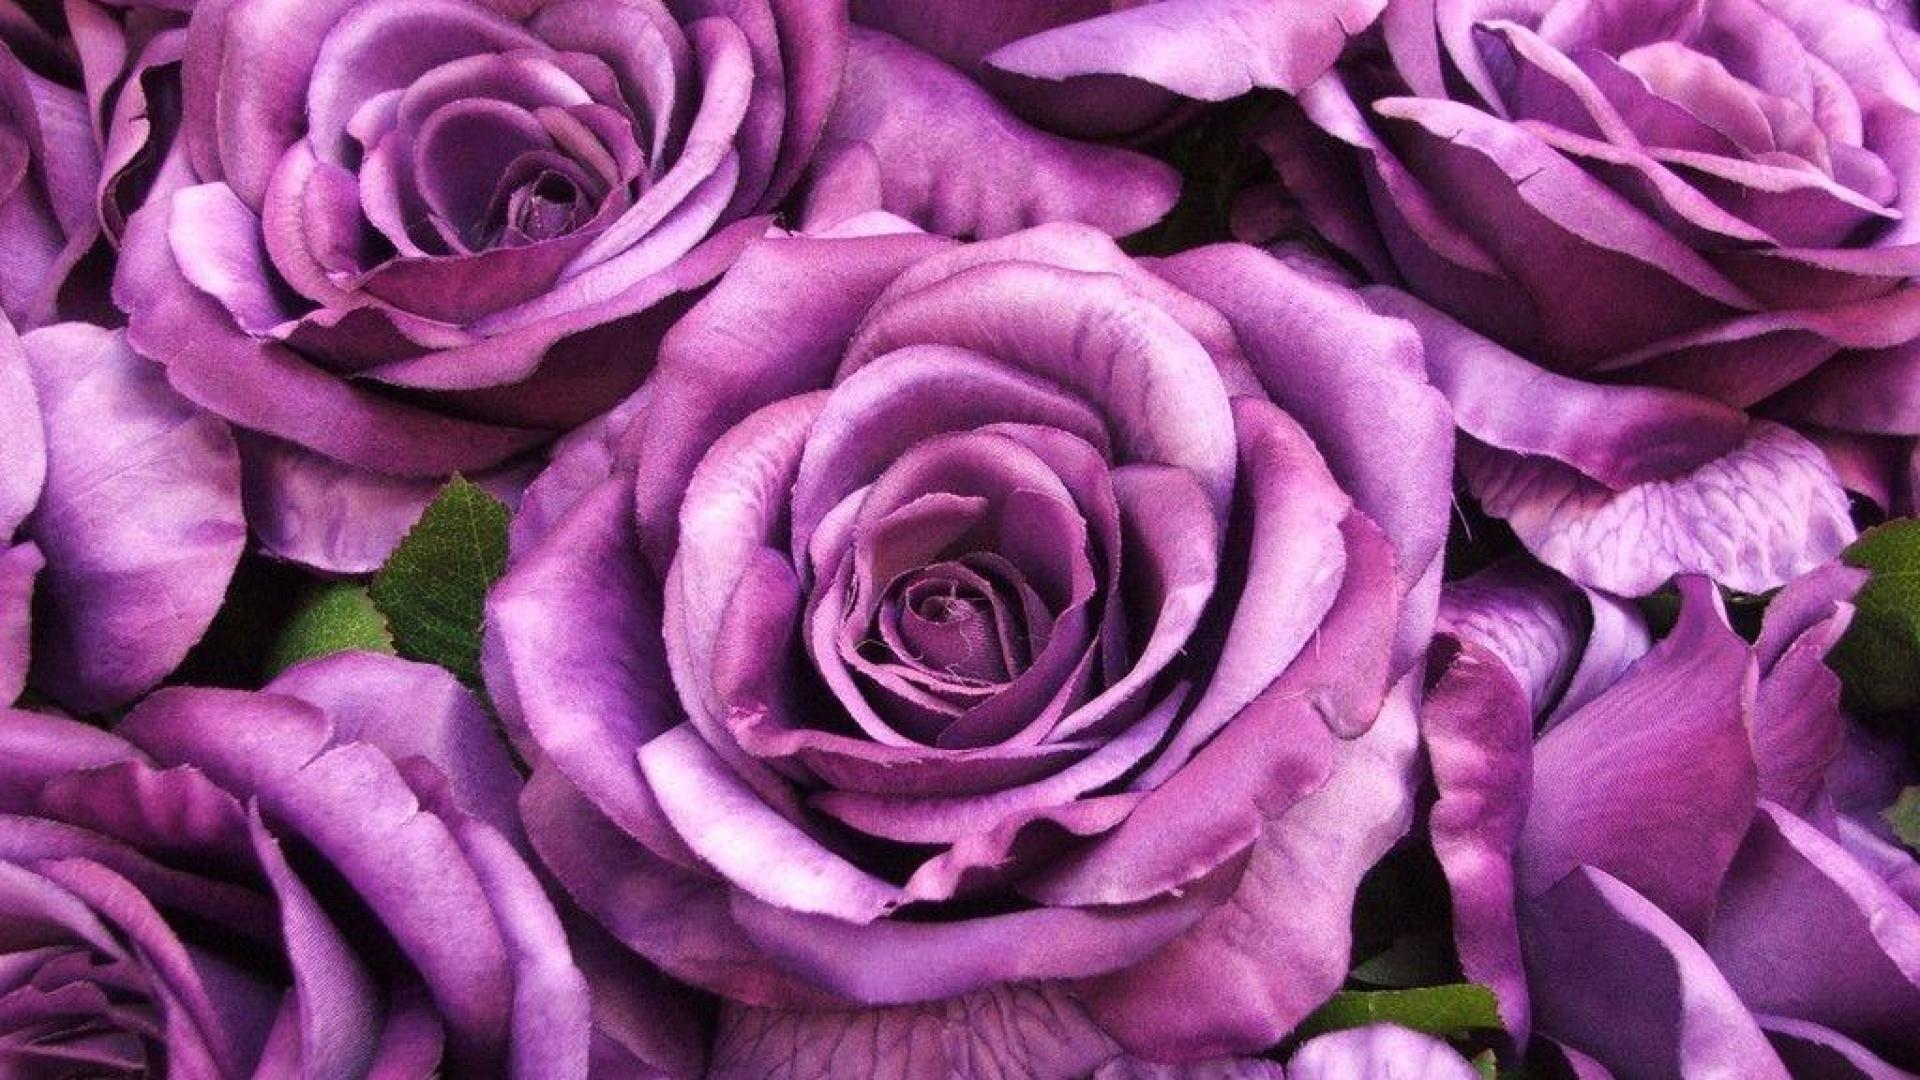 Big Purple Roses Wallpaper And Image Pictures Photos